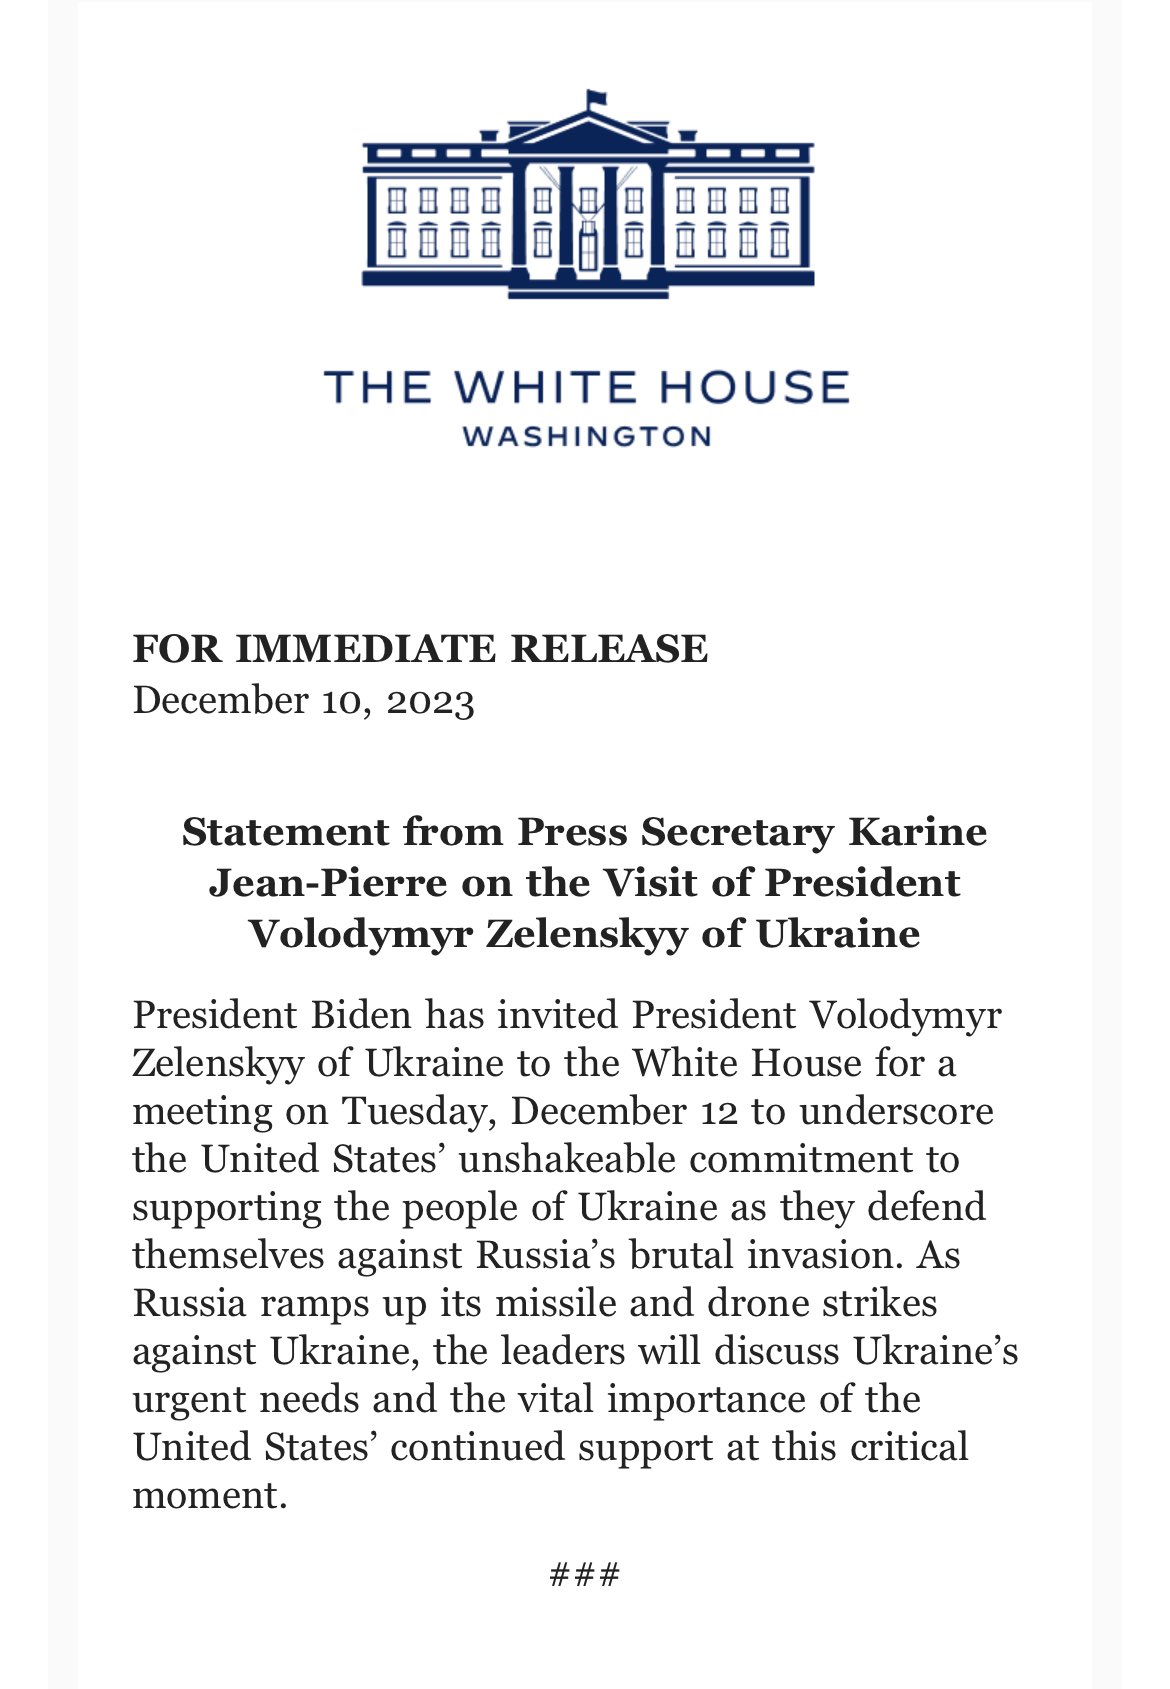 Statement by the President from the White House regarding President Zelenskyy's visit to DC on 11 and 12 DEC 2023.